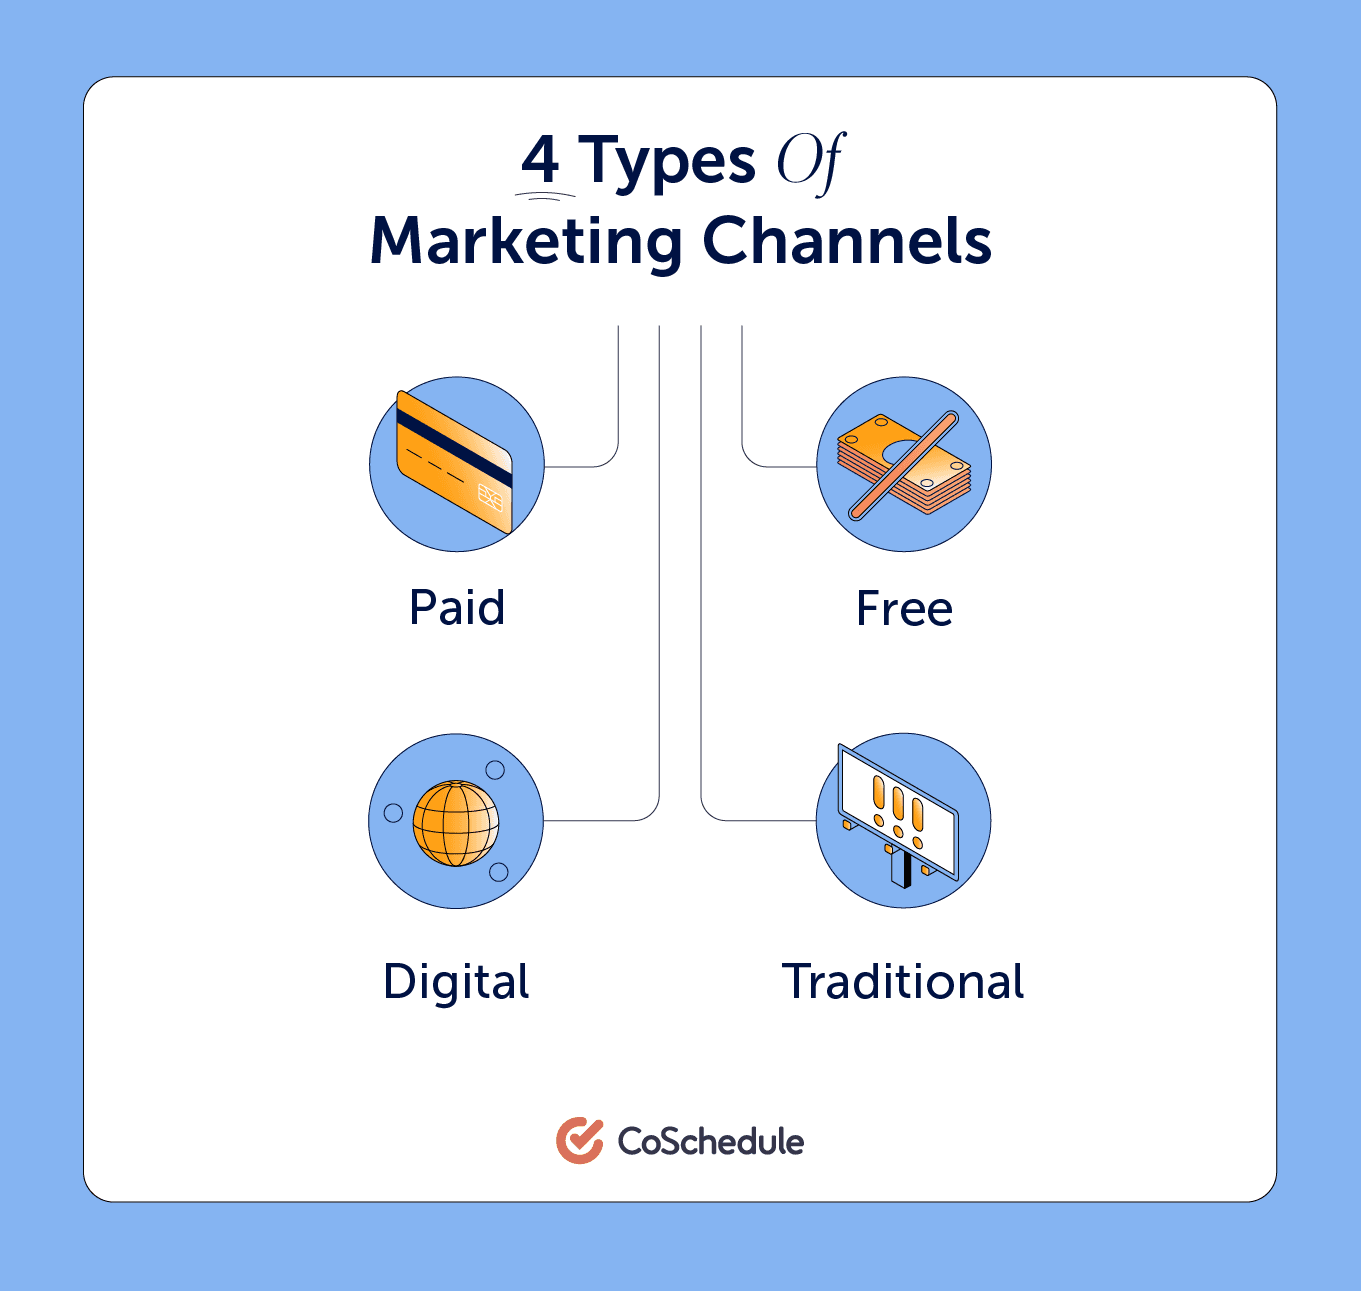 The 5 Essential Sales Channels for Any Consumer Product Company